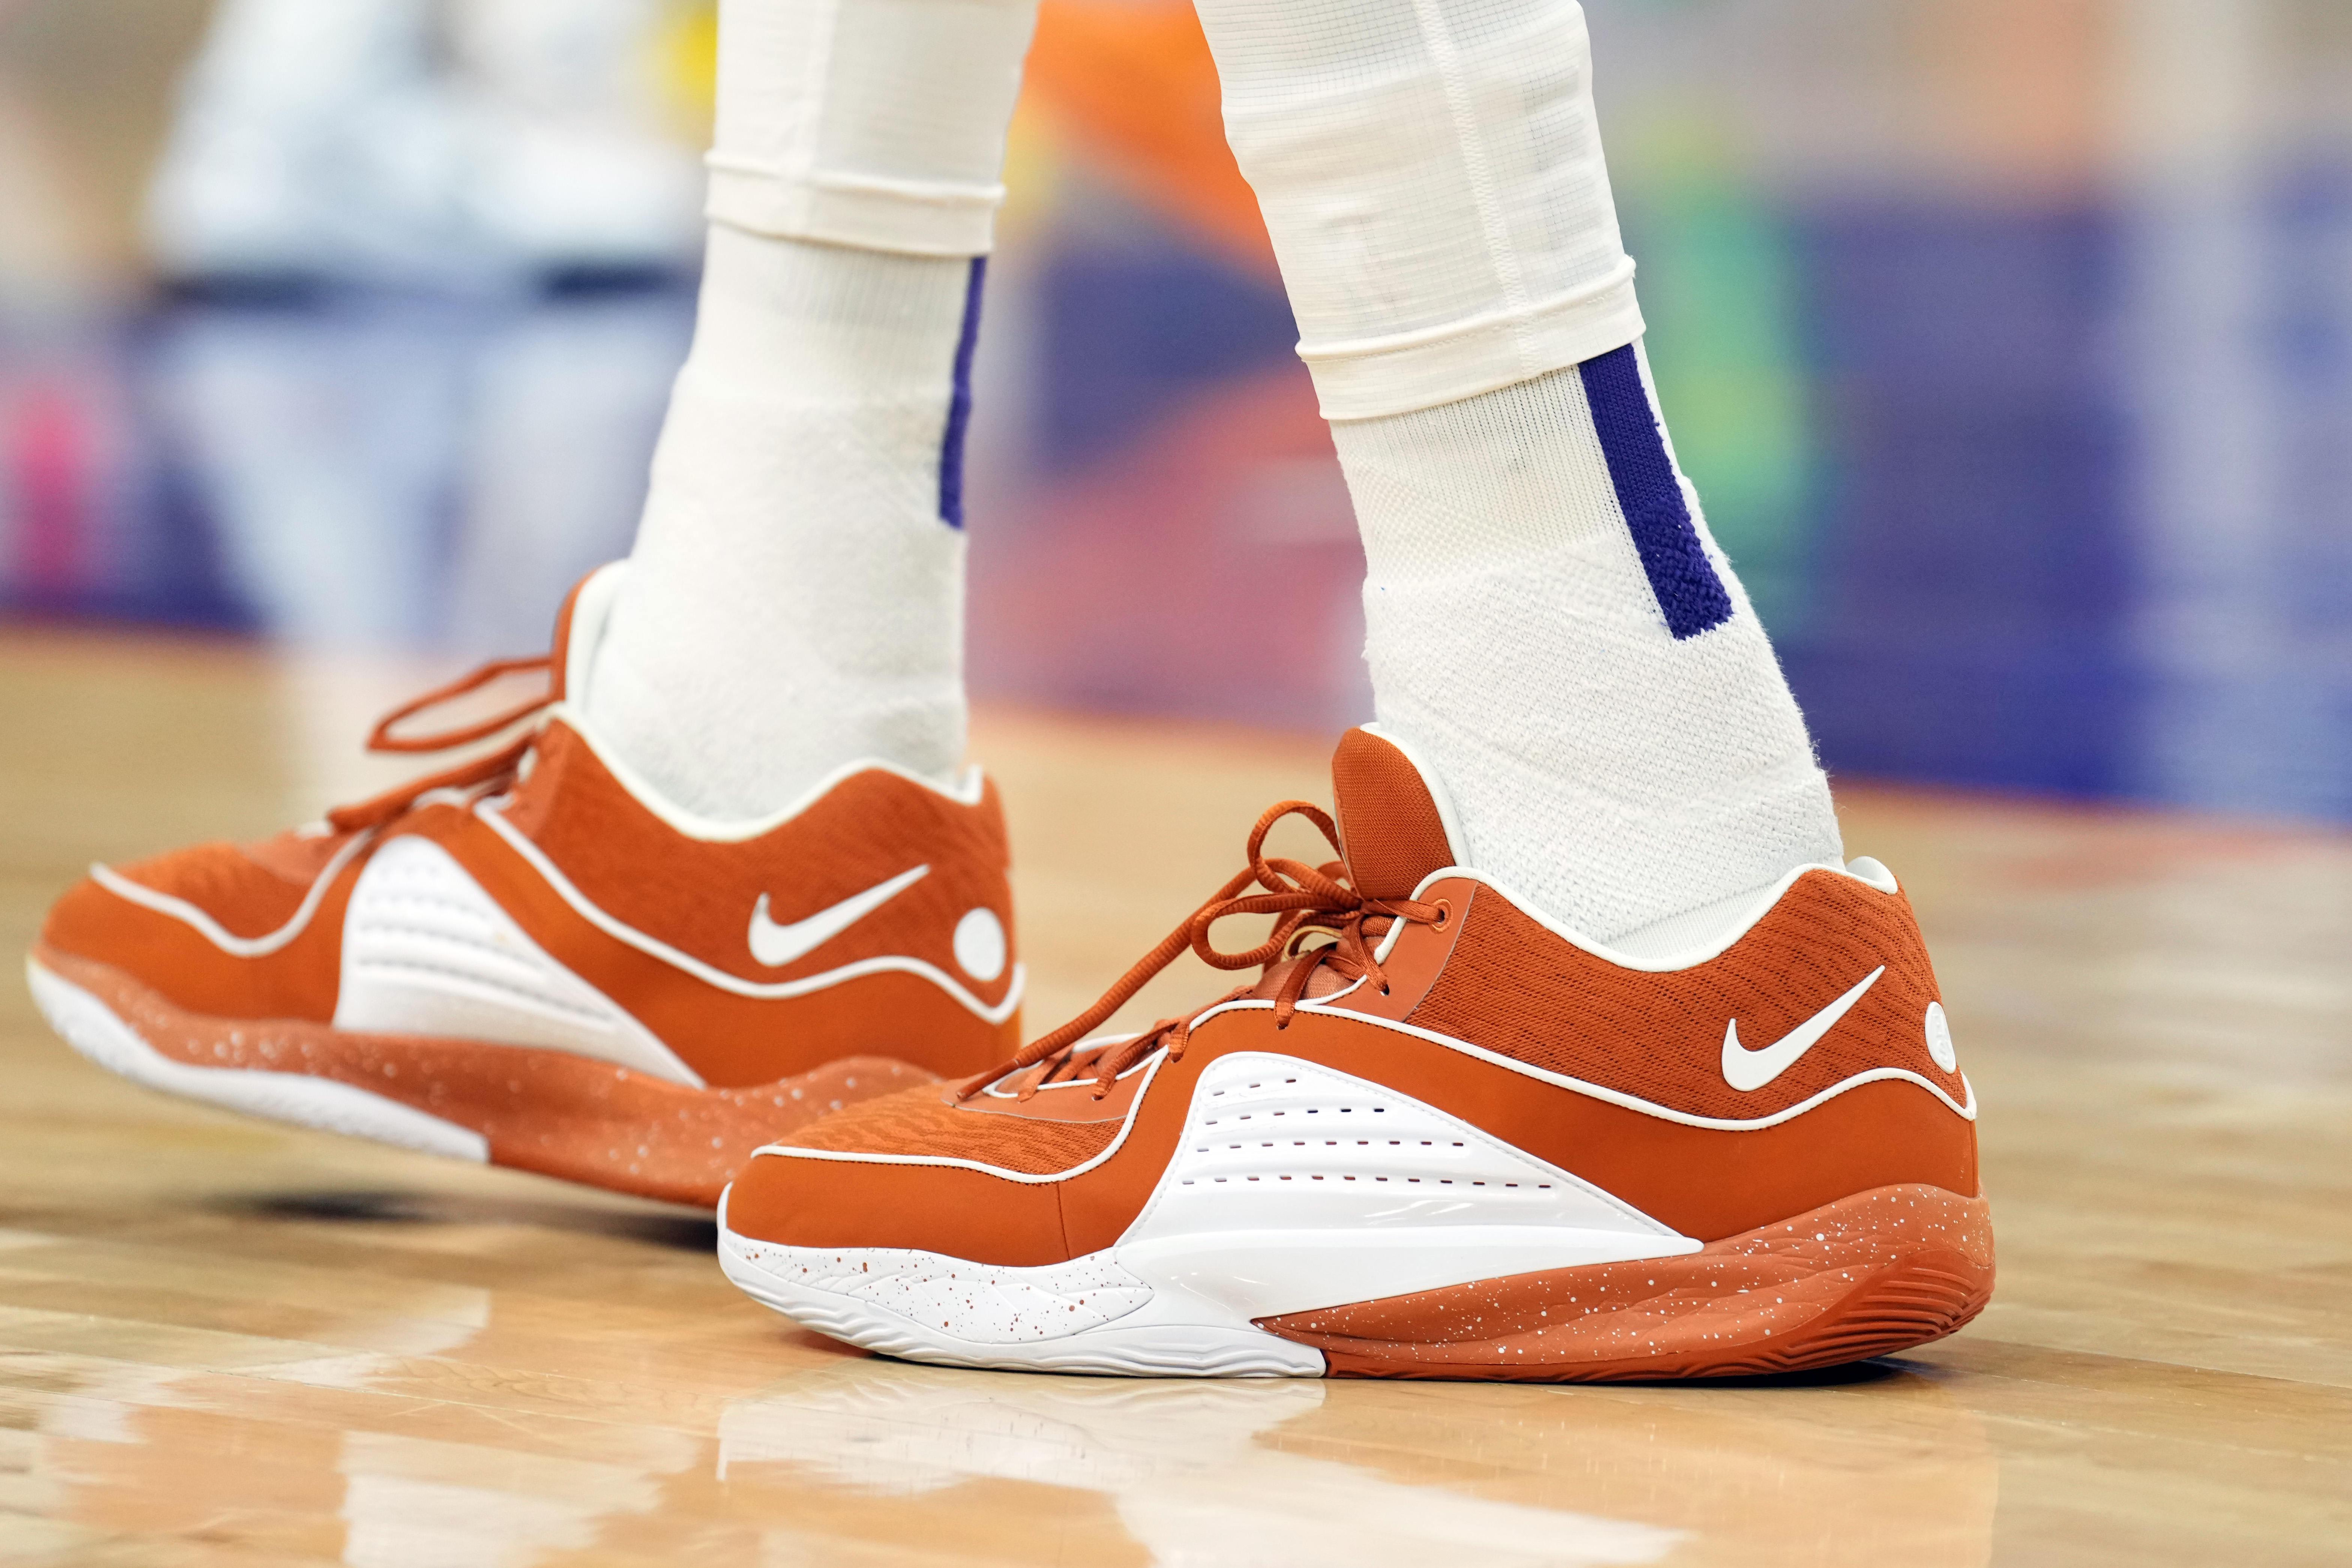 Phoenix Suns forward Kevin Durant's orange and white Nike sneakers.